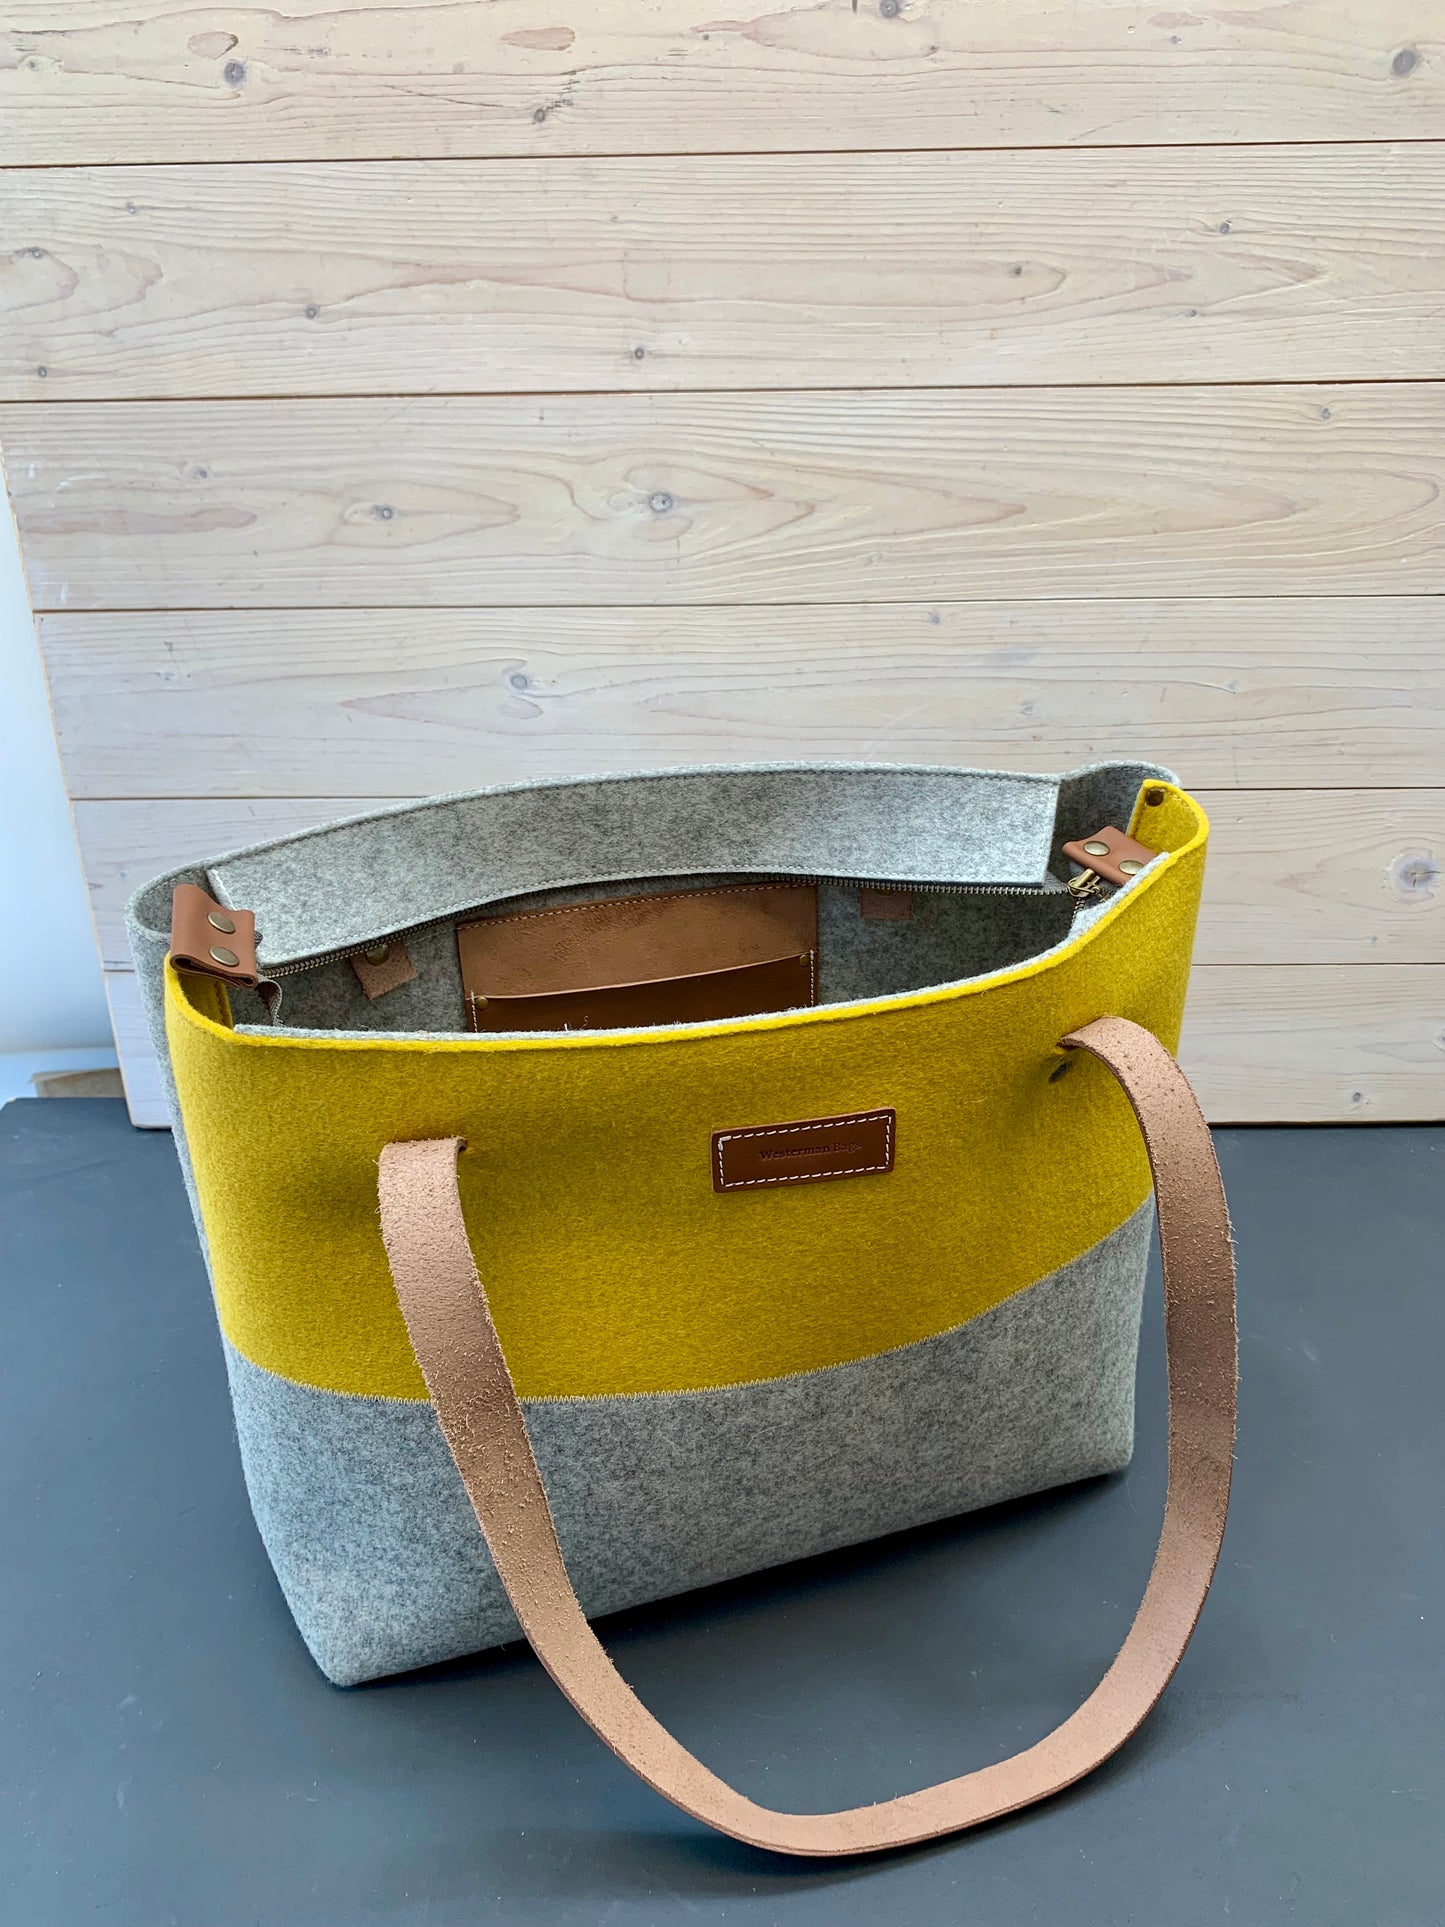 Felt bag with leather handles Dutch Design by Westerman bags